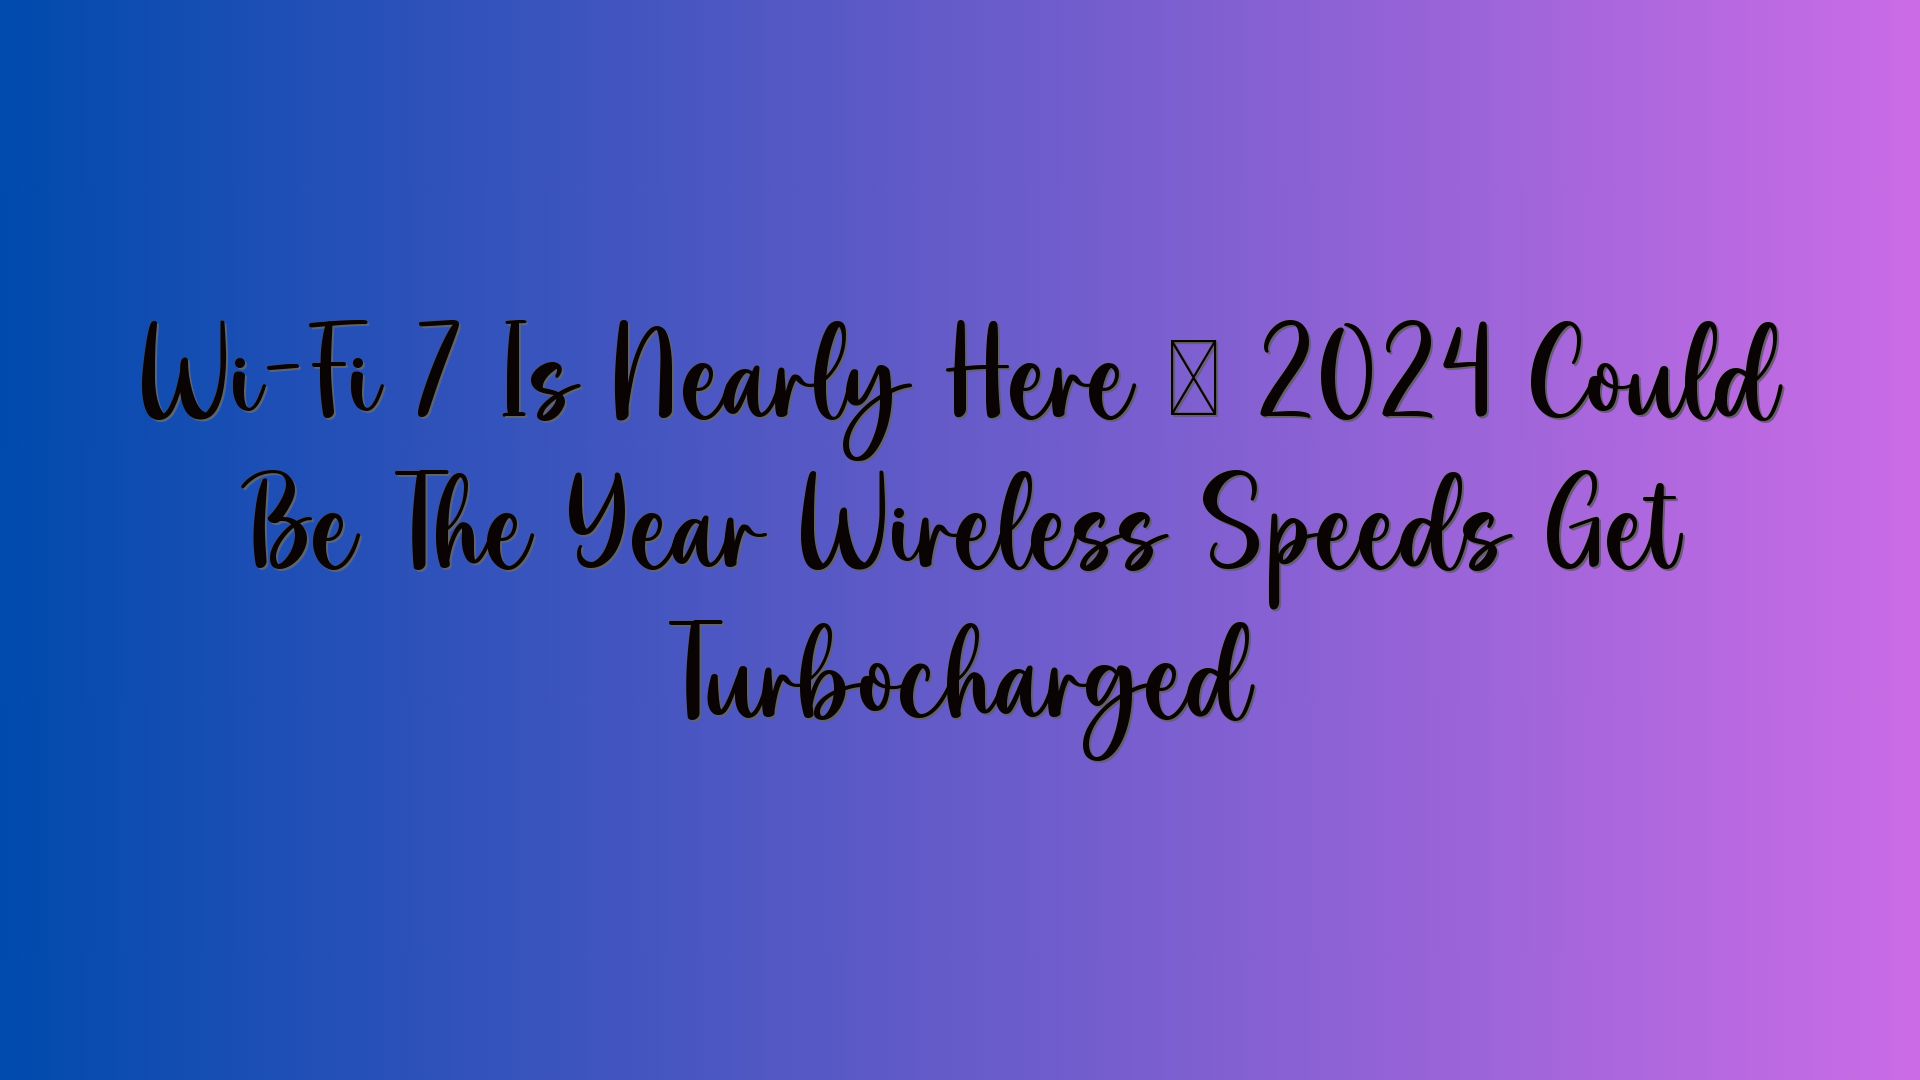 Wi-Fi 7 Is Nearly Here – 2024 Could Be The Year Wireless Speeds Get Turbocharged